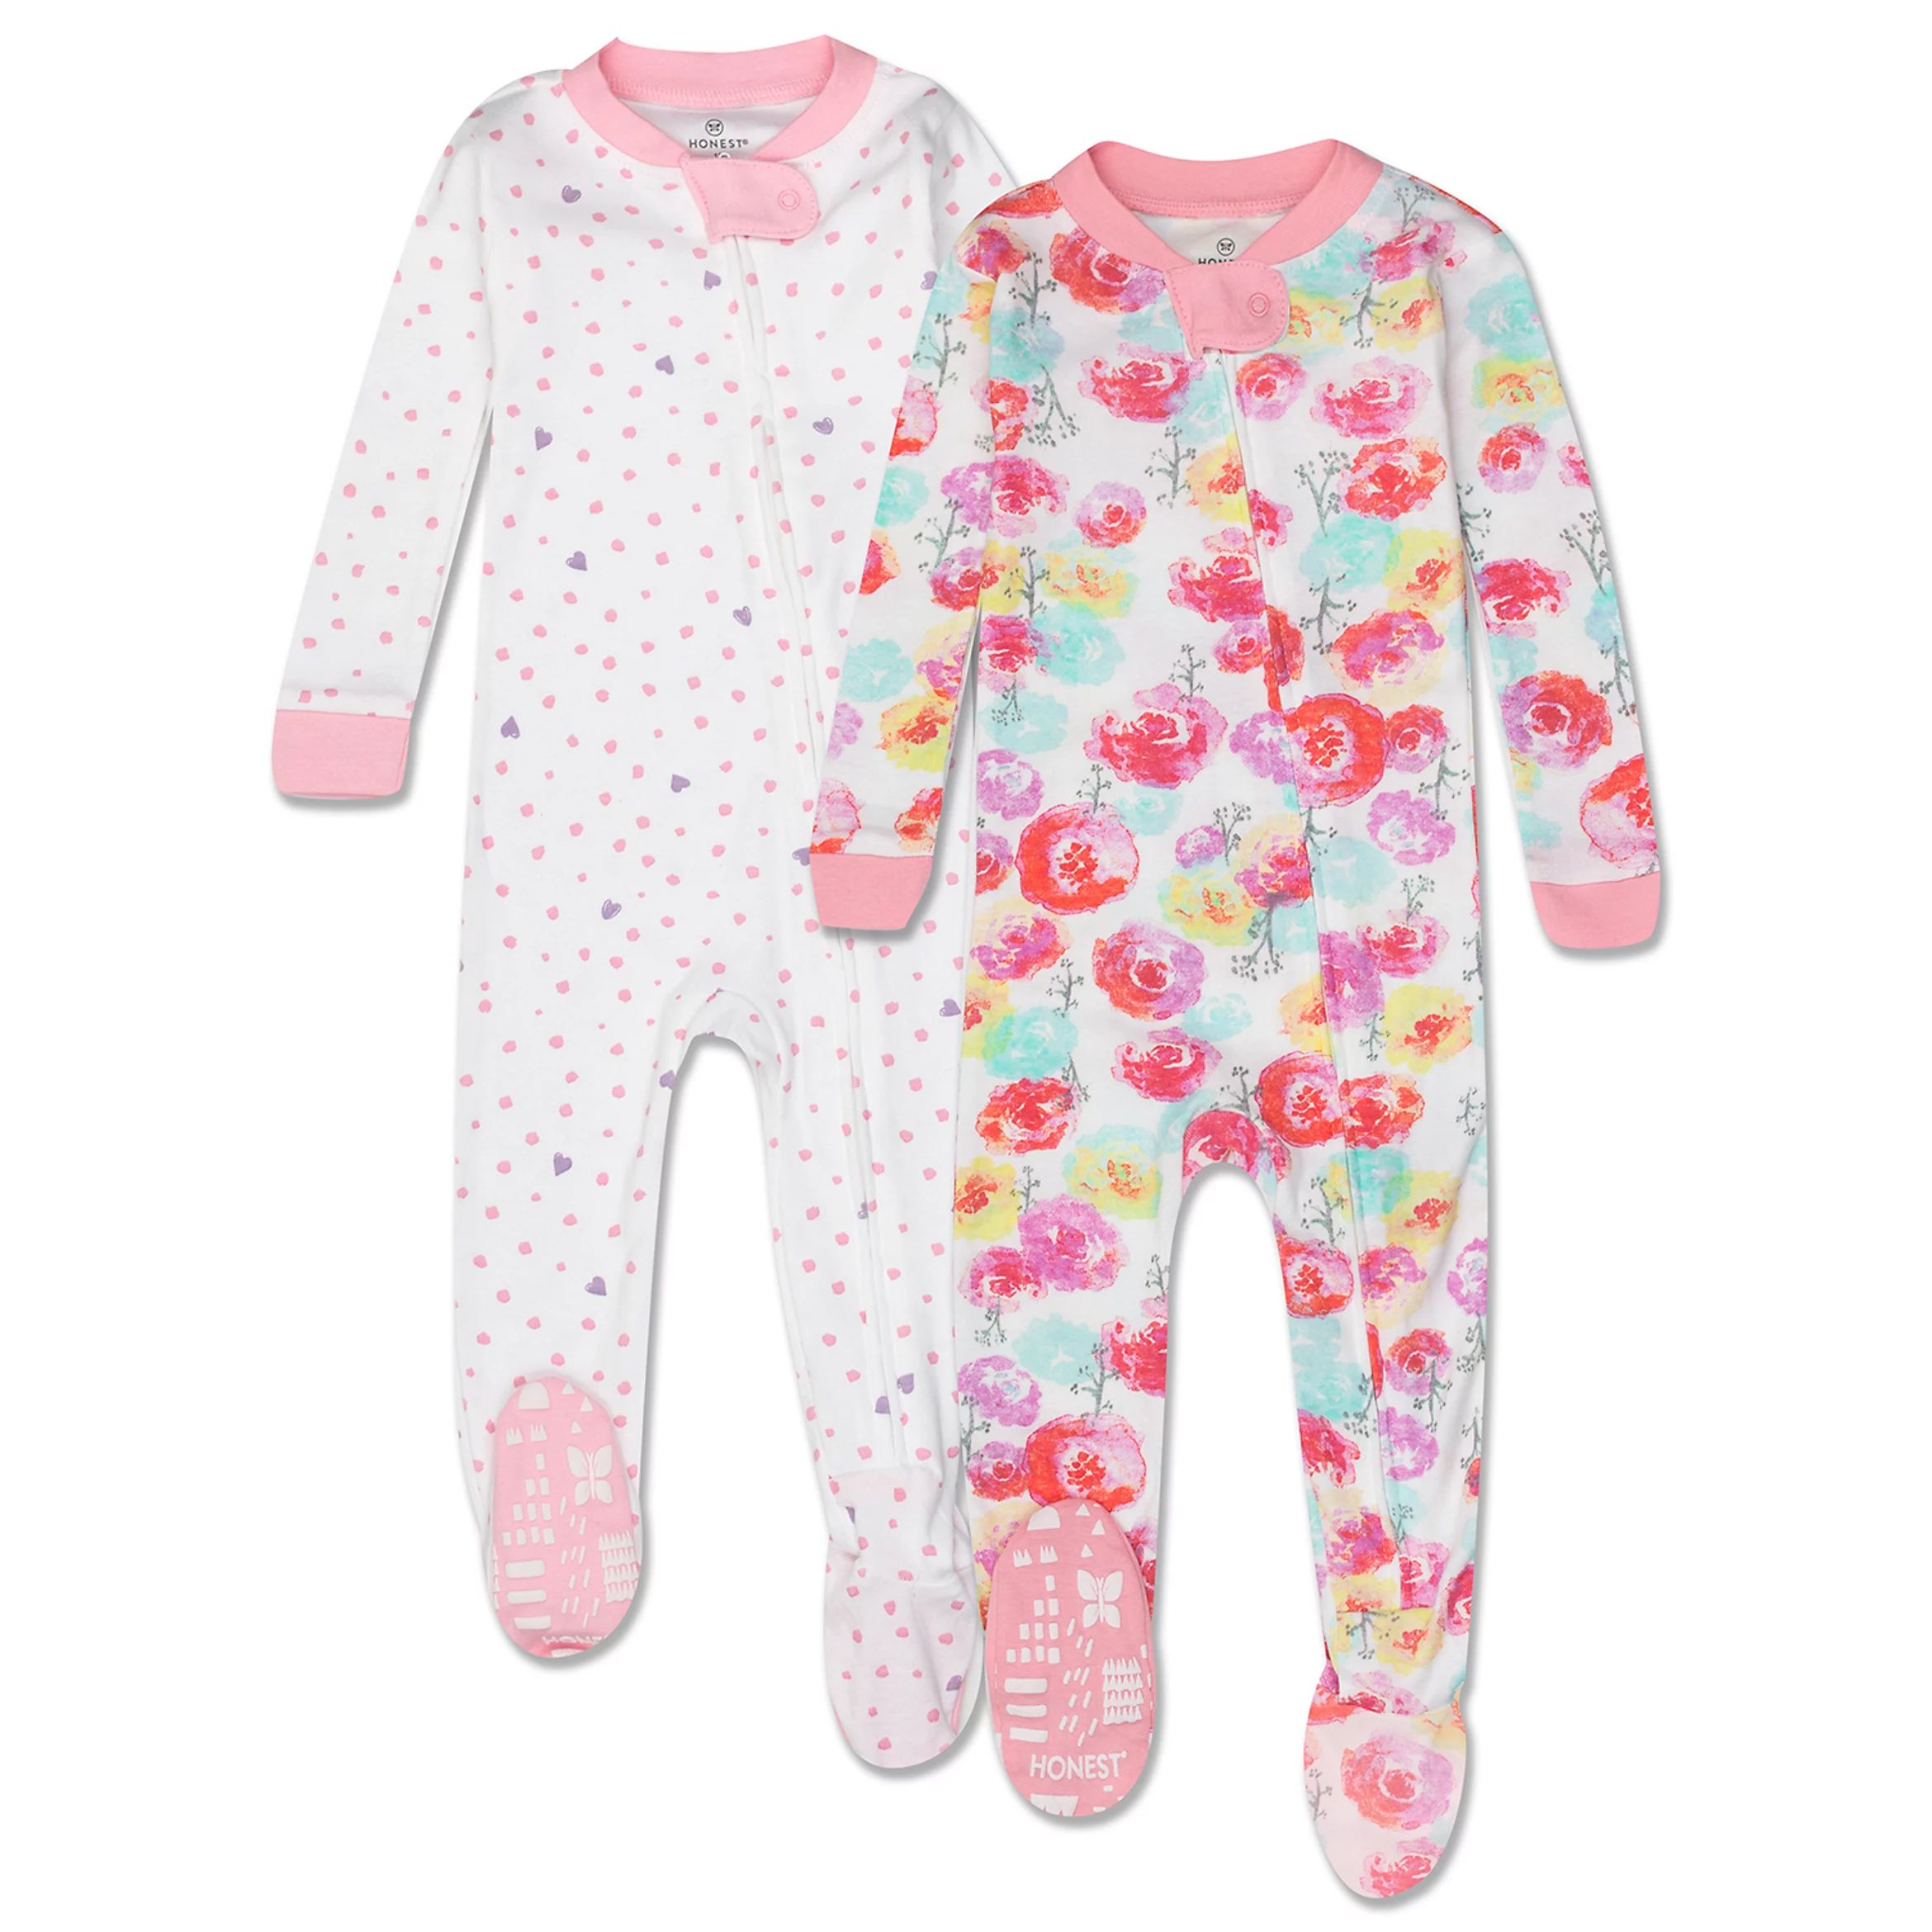 HONEST BABY CLOTHING 2-Pack Organic Cotton Snug Fit Footed Pajamas | Kohl's